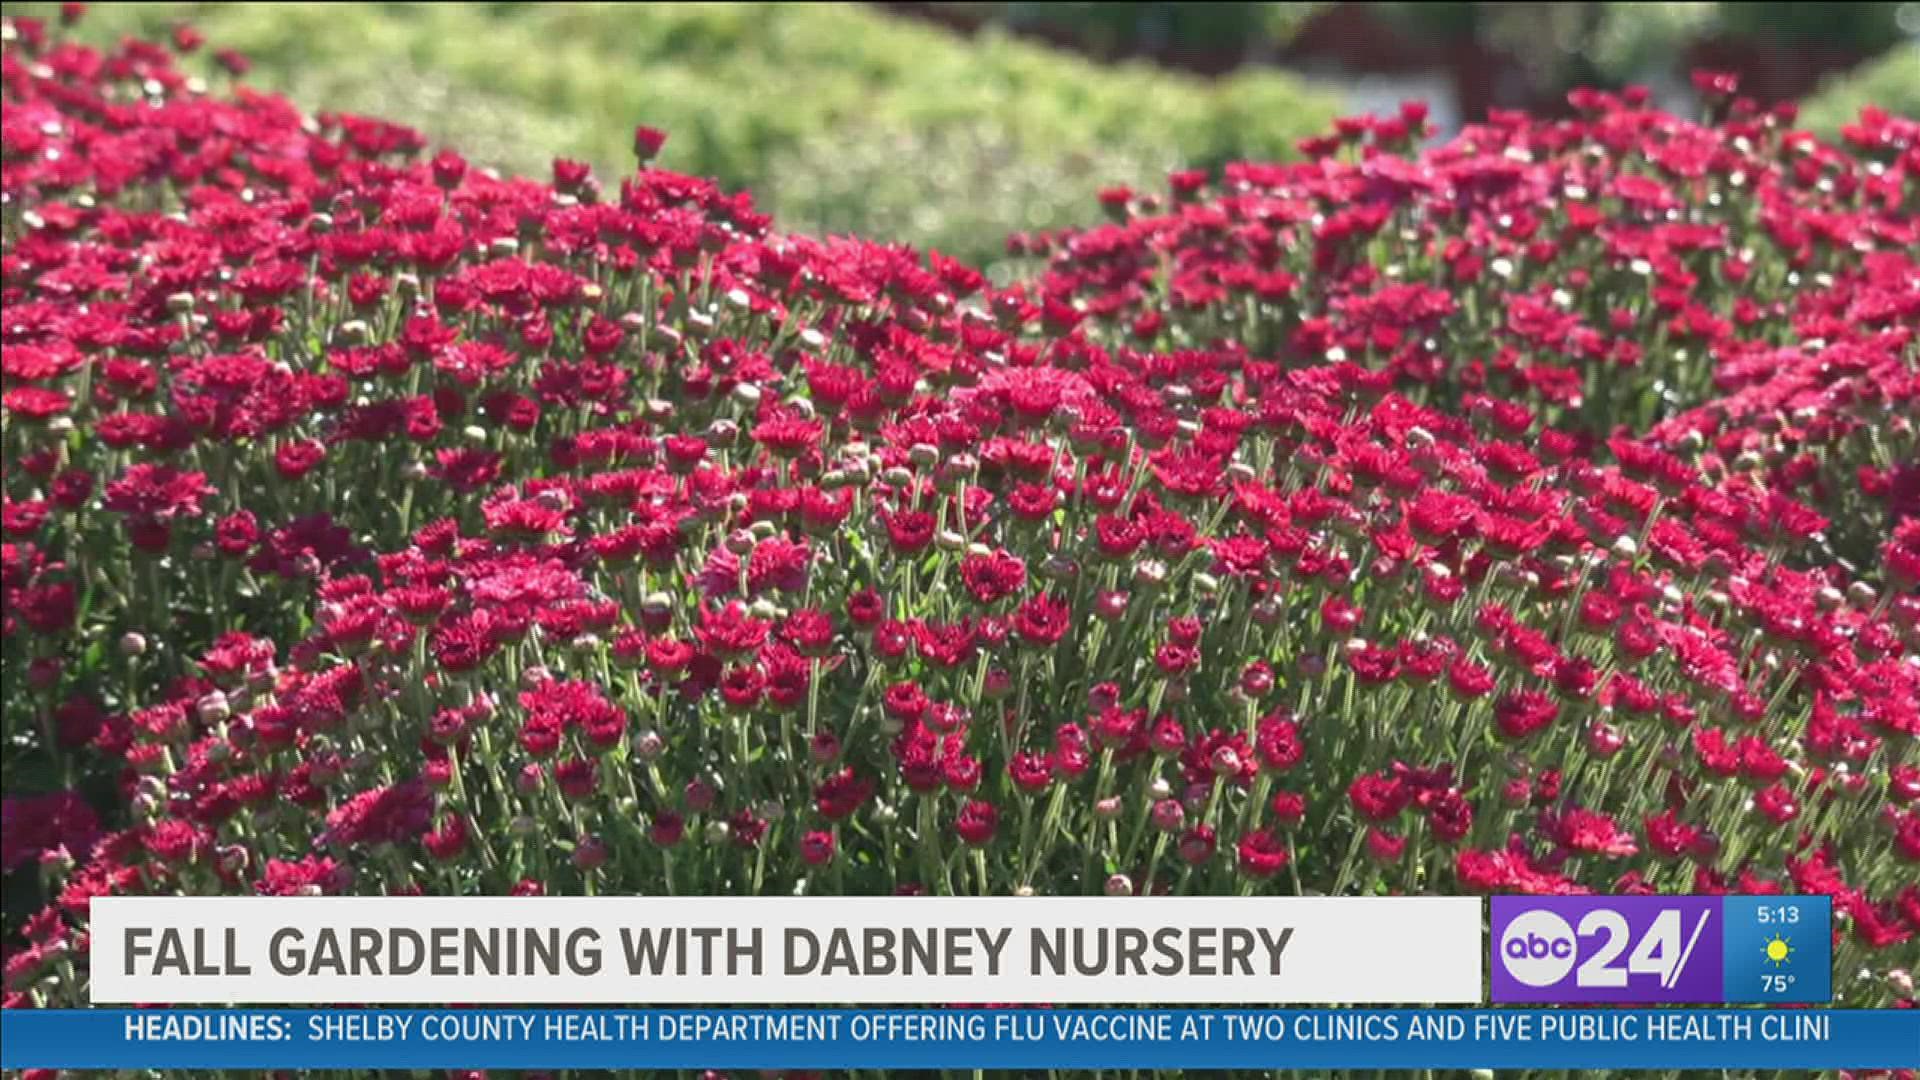 “This should be the main planting season of the year but consumers plant more in the spring,” said Mark Pitts, Plant Propagator at Dabney Nursery.